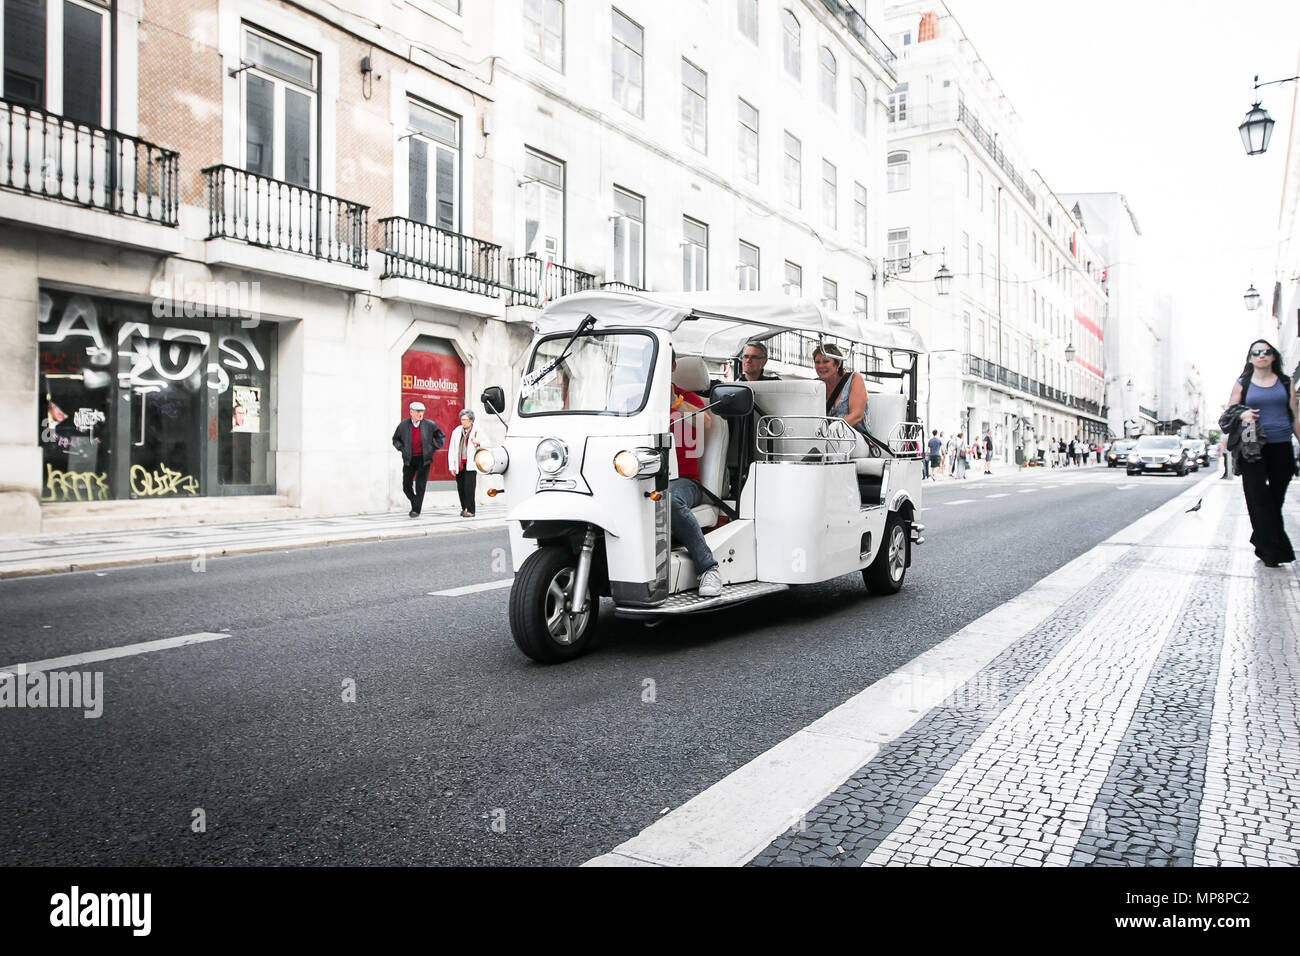 Lisbon, Portugal, May 5, 2018: Tourists are traveling by a traditional tuk-tuk vehicle down a street in downtown Lisbon. Stock Photo